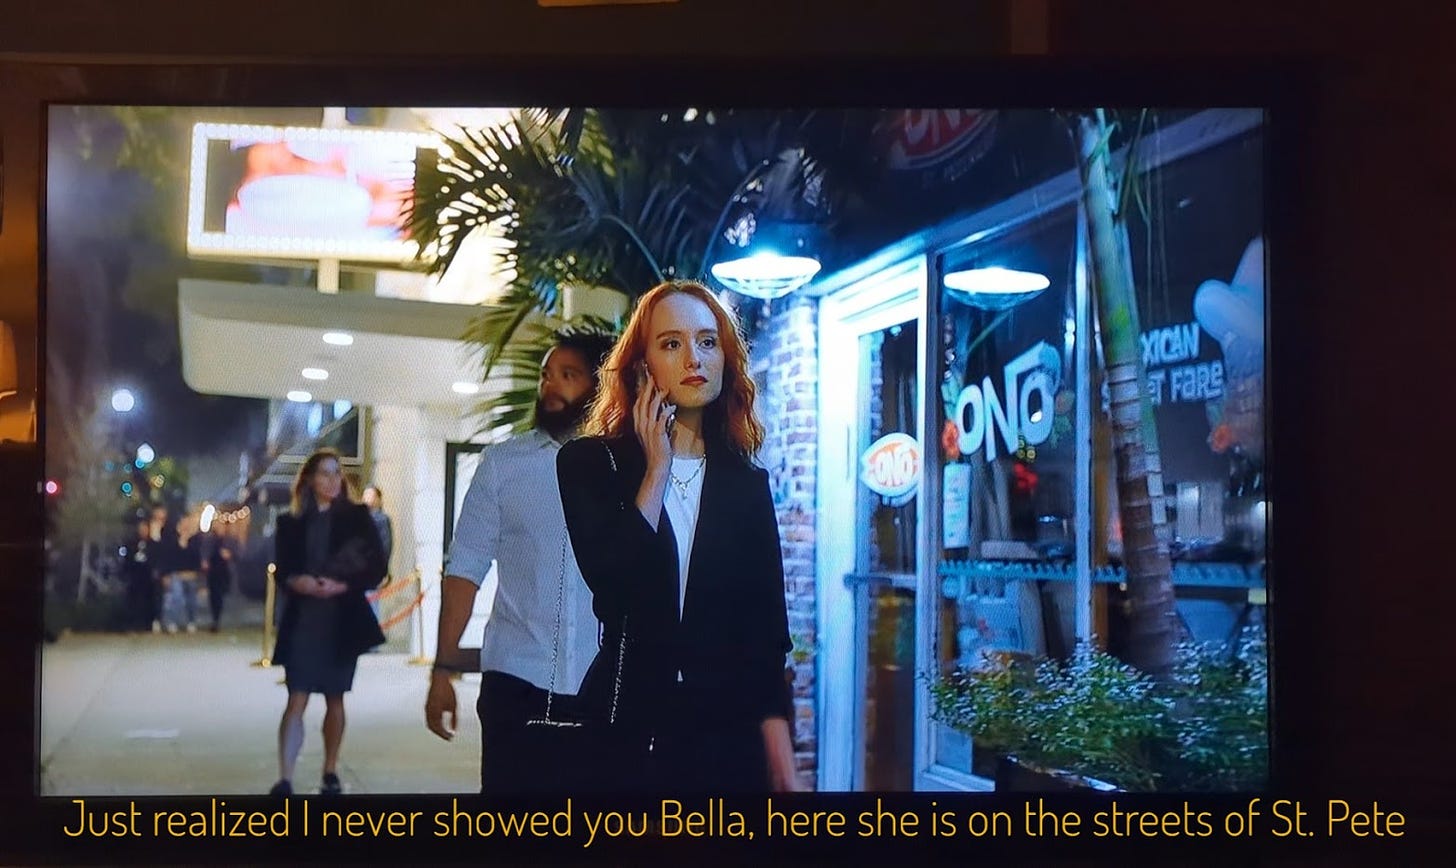 Bella, a thin white woman with long red hair, on the phone, captioned "Just realized I never showed you Bella, here she is on the streets of St. Pete"